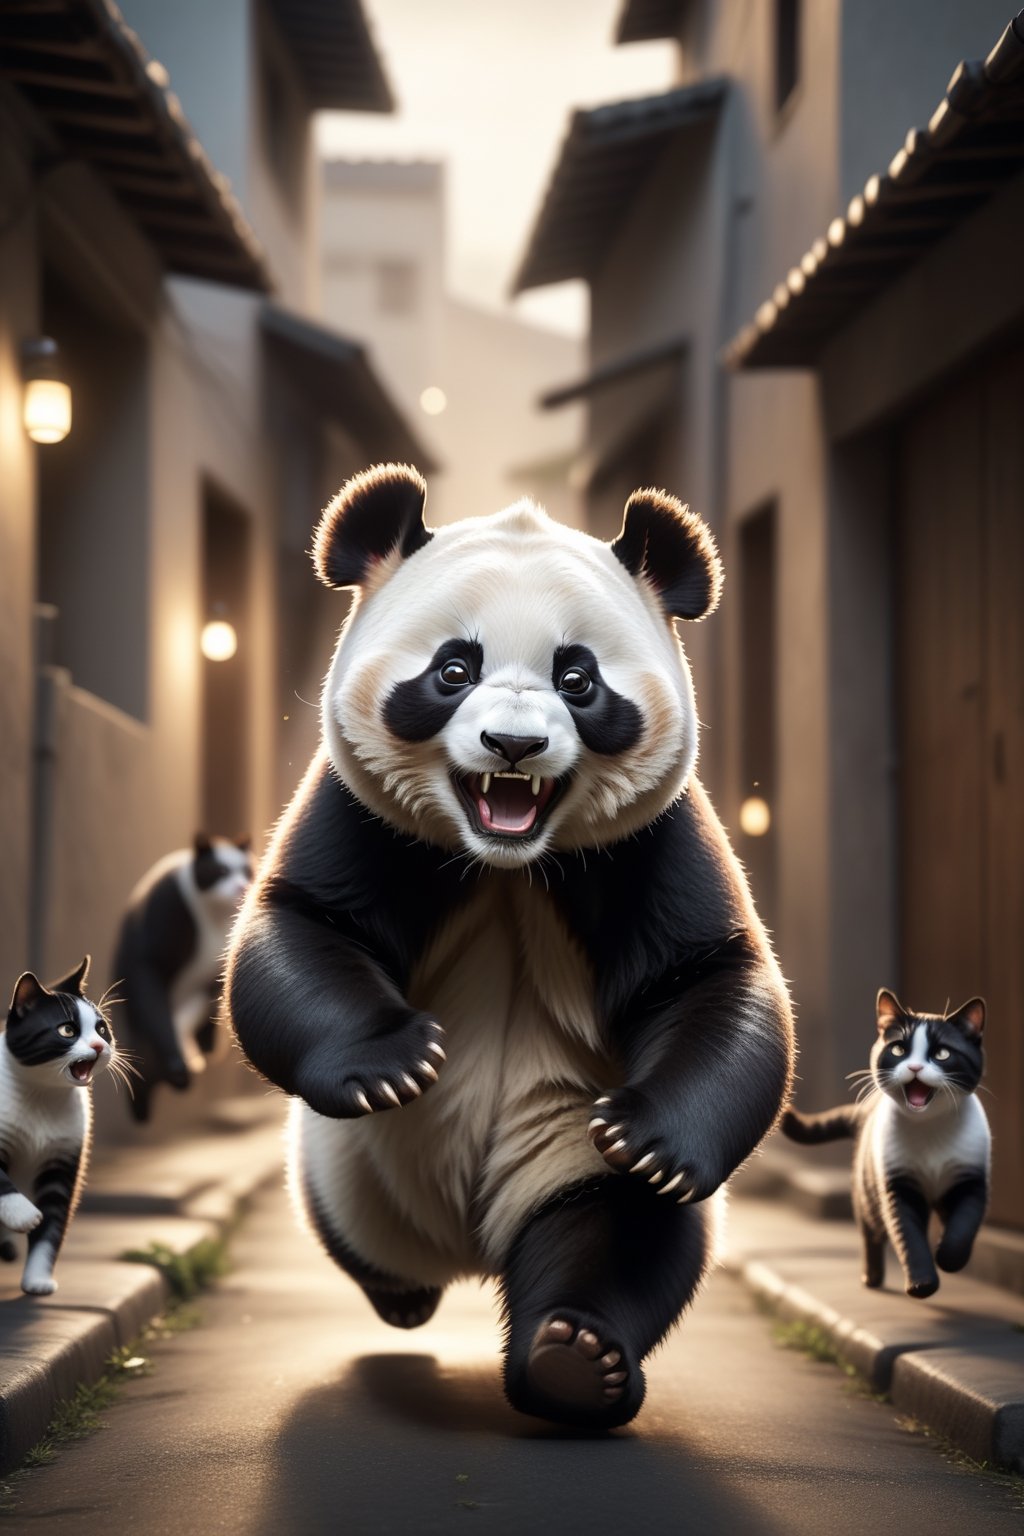 panda, running through alley chasing by lot of cats, (cat yawing), while laughing, flufy body, high contrast, (natural skin texture, hyperrealism, soft light, sharp),  shabby warepack , silo tech background, low key, top light, dark theme, highly detailed, wide-angle, cinematic still, masterpice
,Movie Still,Film Still,Cinematic,Cinematic Shot,Cinematic Lighting,Extremely Realistic,more detail XL